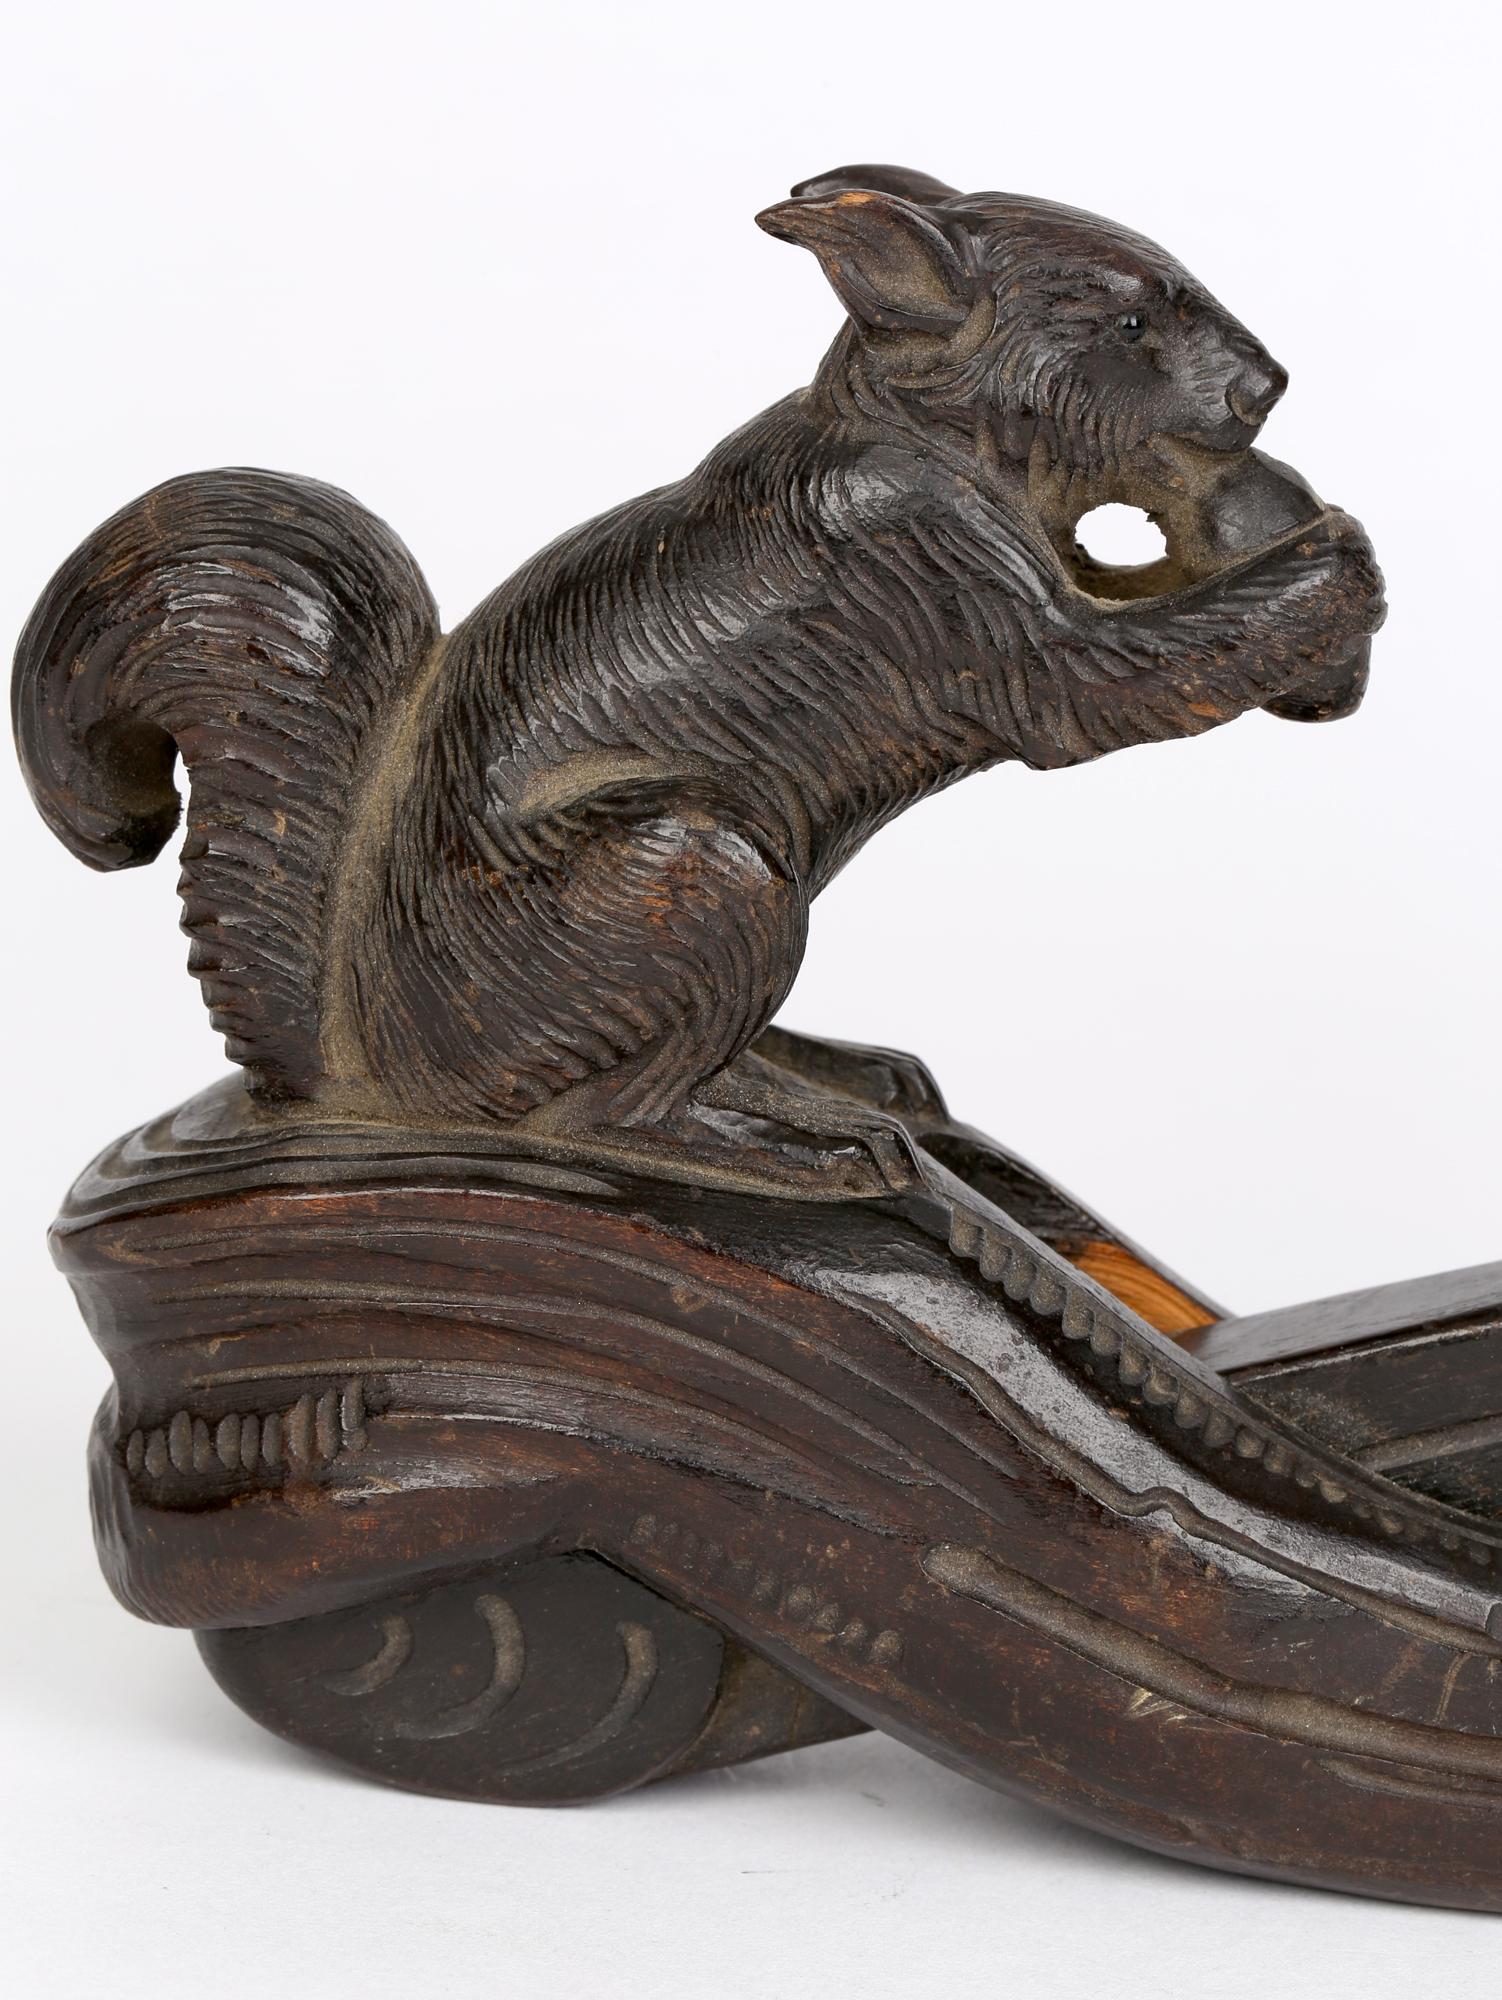 A rare antique German hand carved wooden nutcracker mounted with a squirrel made in the Black Forest and dating from around 1890. The nutcracker, probably made from pine and is carved in two sections which form a up and down pincer movement with a